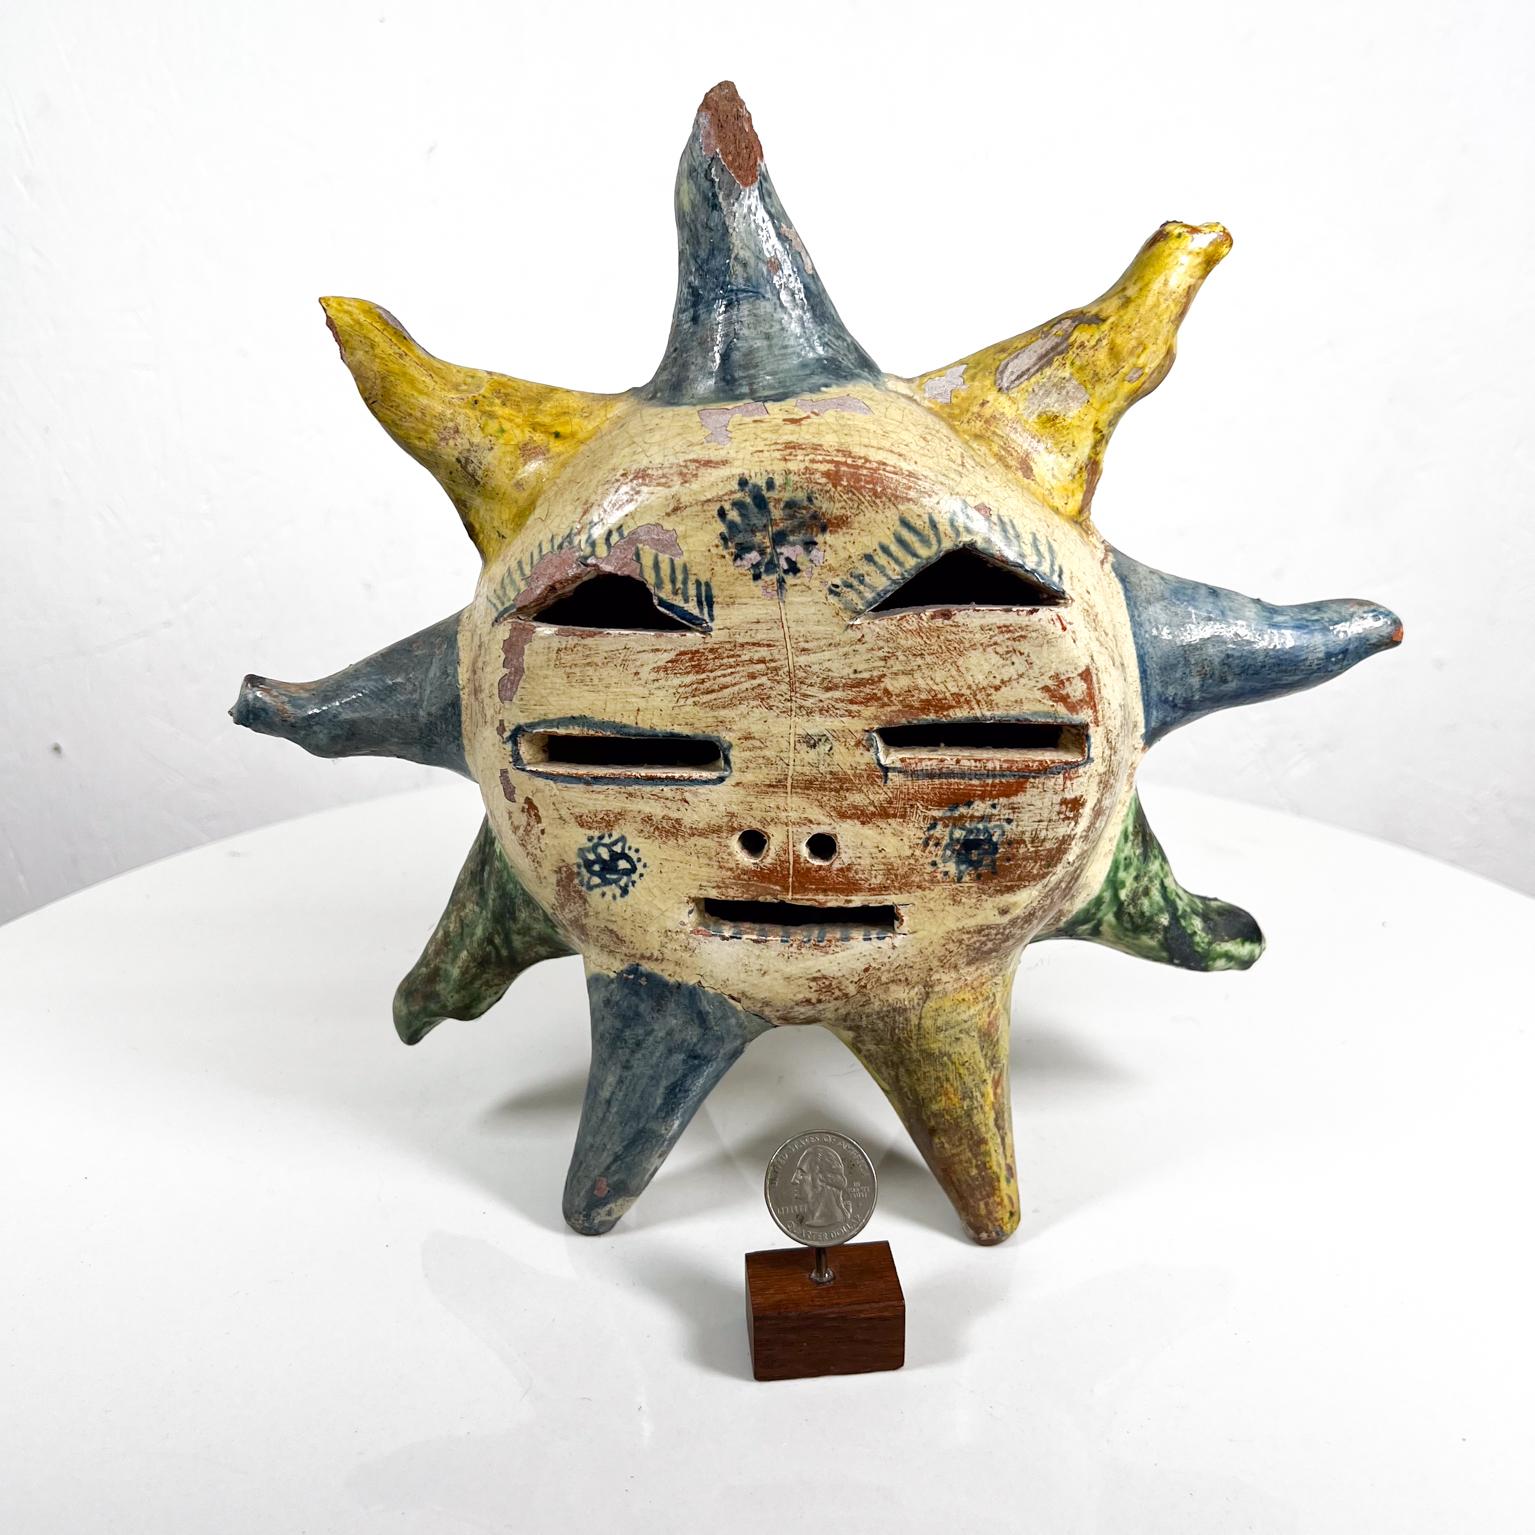 1970s Modern Decorative Mexican Art Pottery Table Star Sun Face Candle Holder
10.5w x3.25d x 10.38h
Preowned vintage unrestored condition.
See all images.